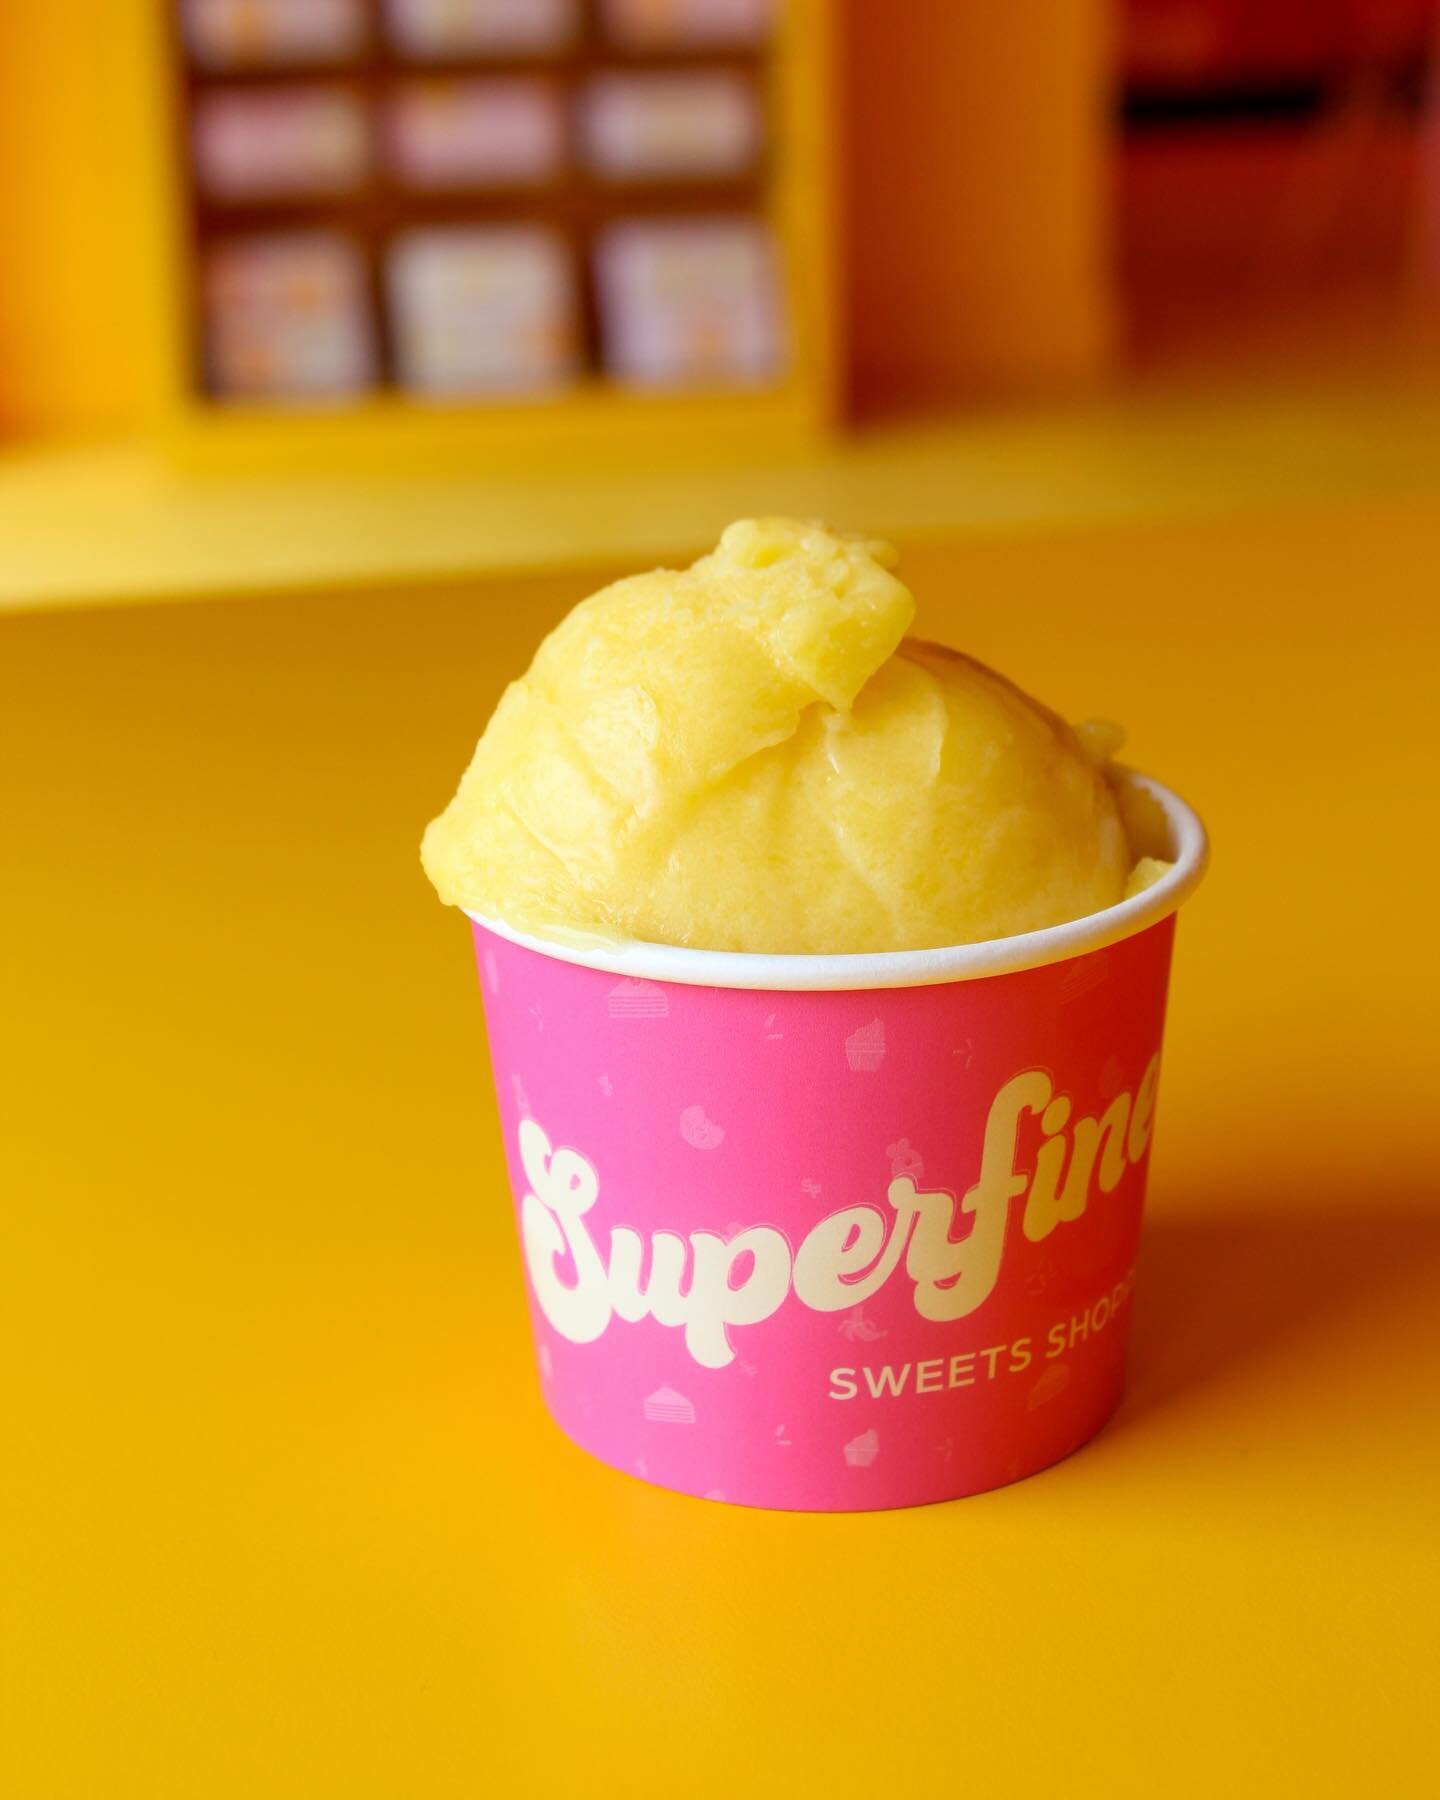 The perfect day for mango pineapple sorbet 🥭🍍